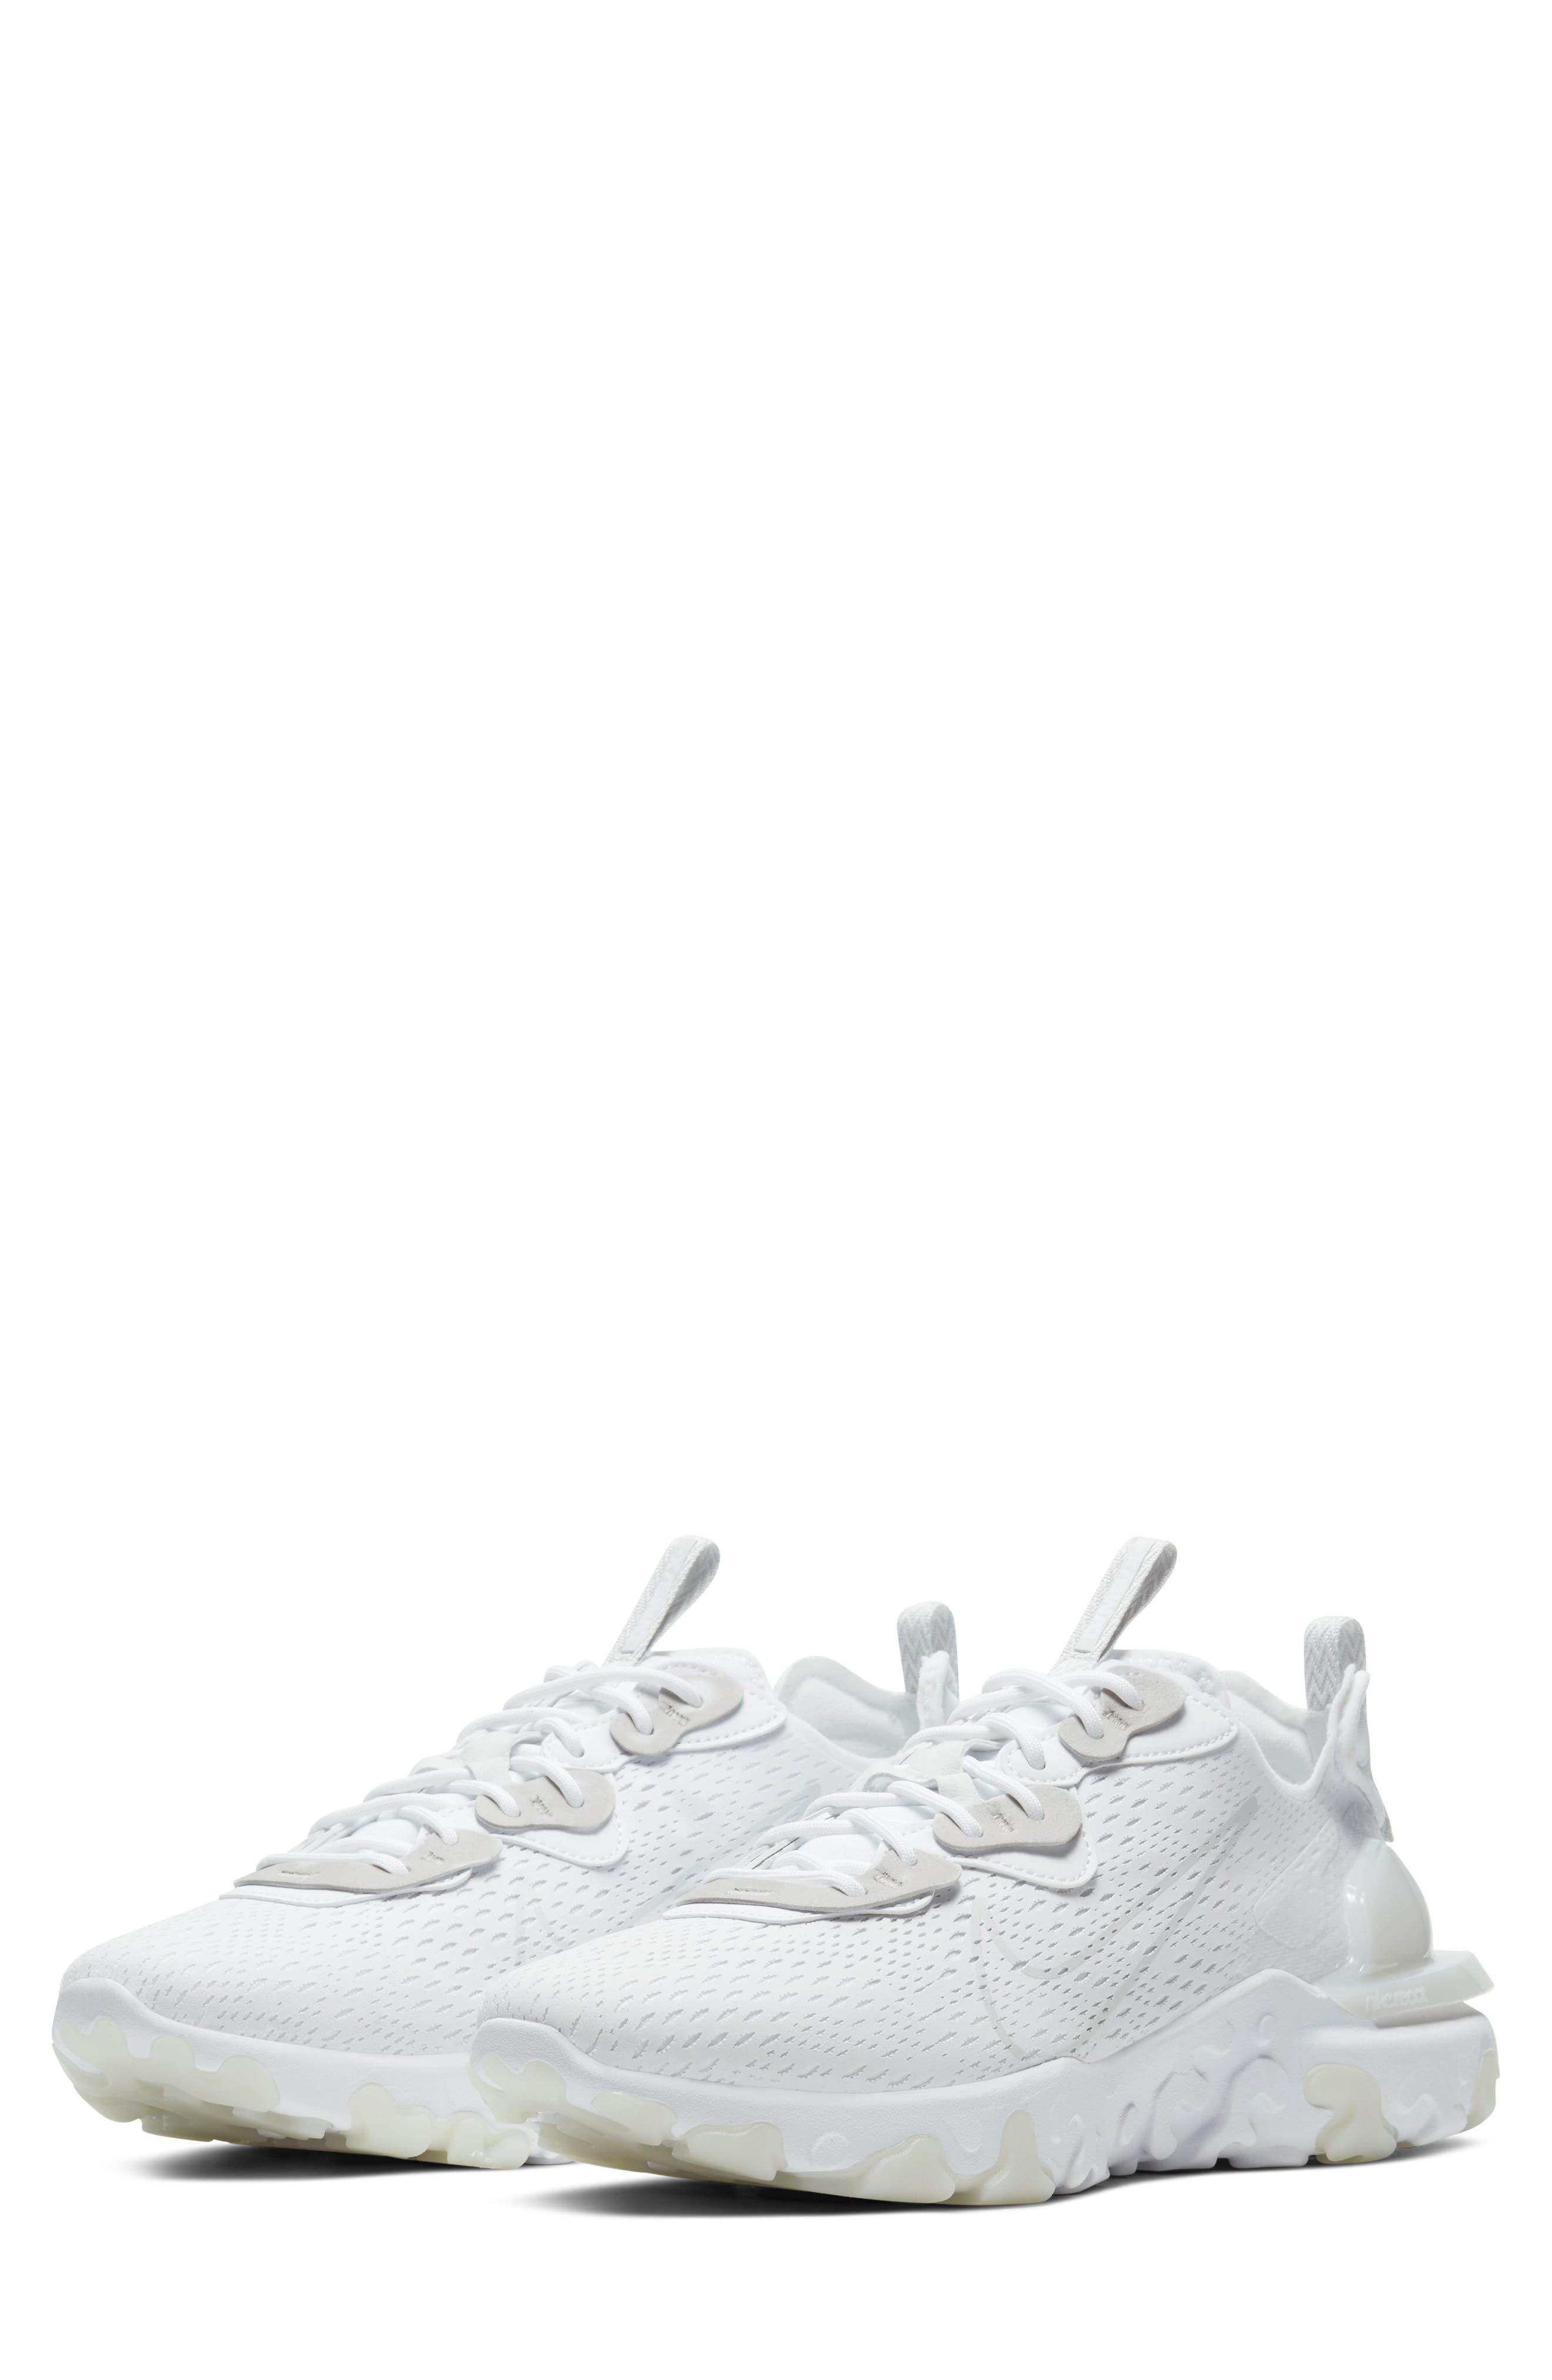 nike react vision honeycomb nordstrom